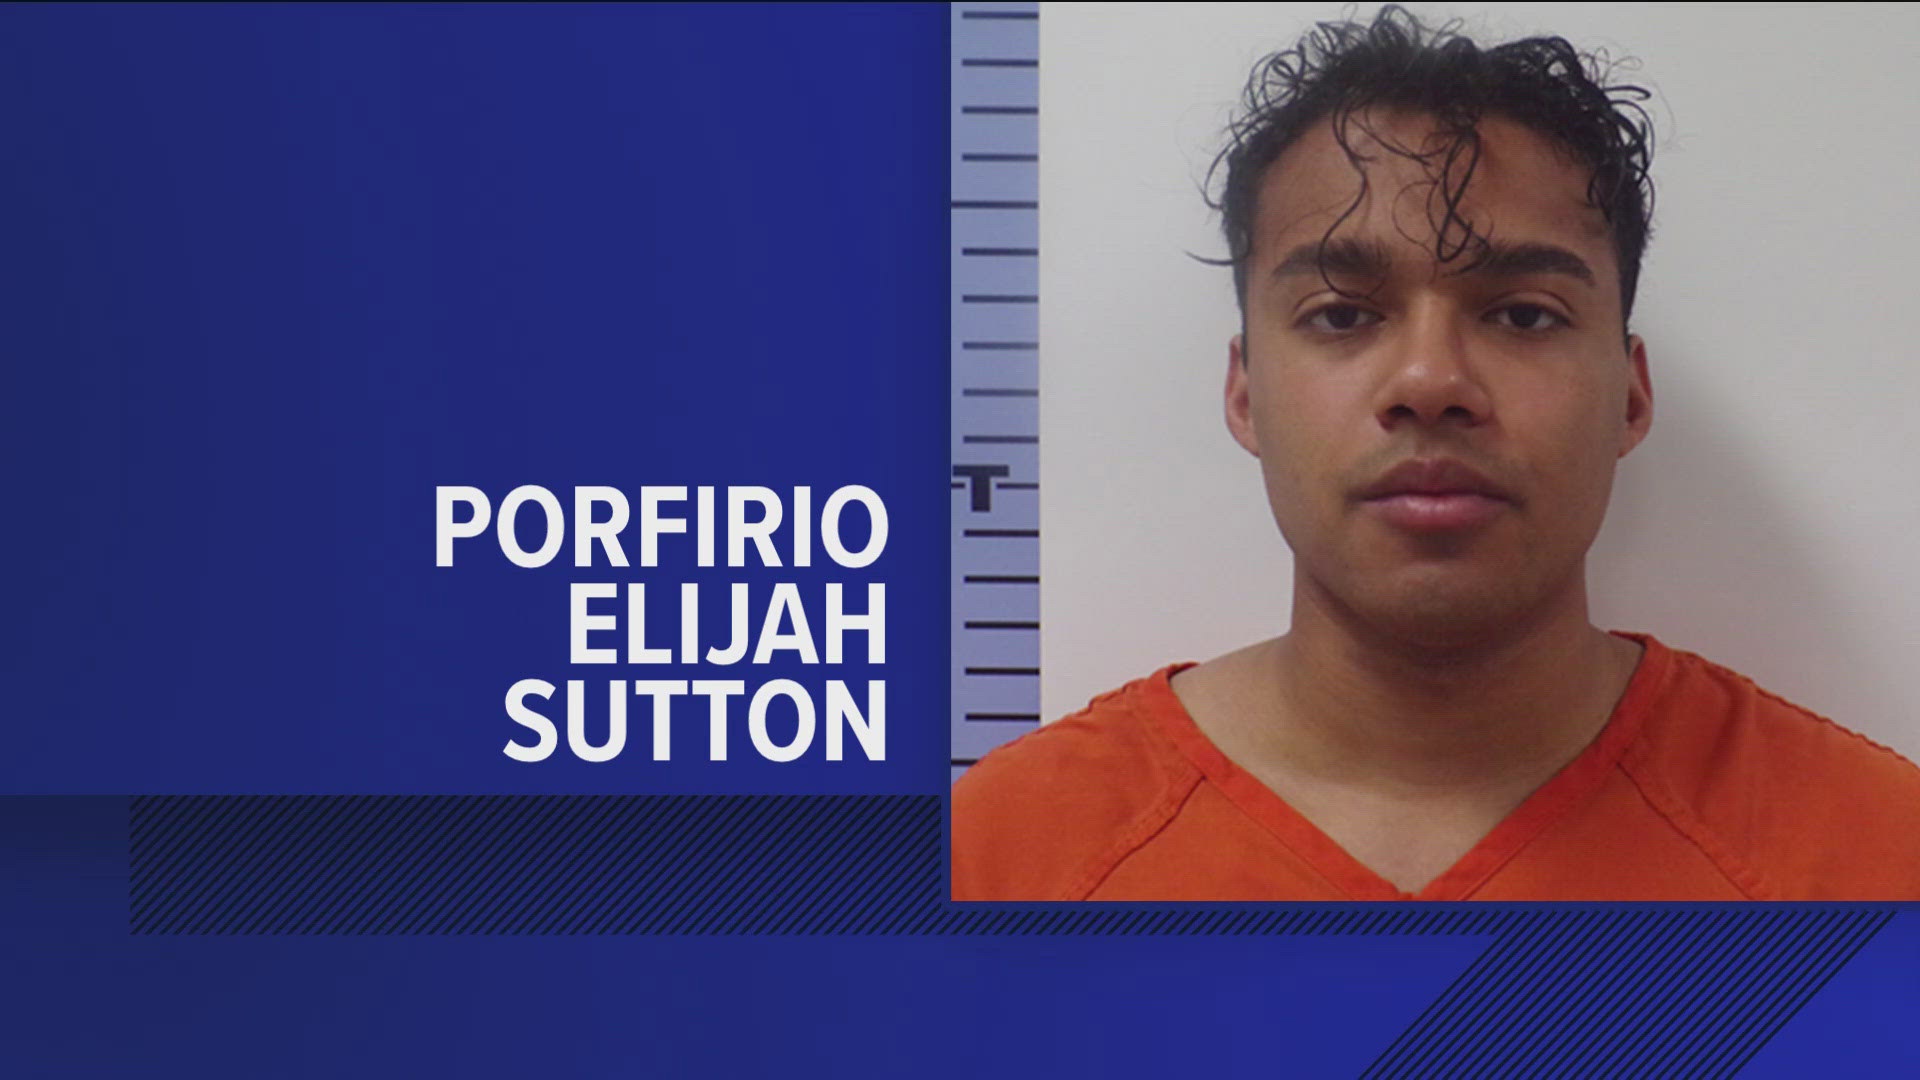 Porfirio Elijah Sutton, 23, of Tiffin, faces charges including disseminating matter harmful to a juvenile, importuning and attempting to have sex with a minor.